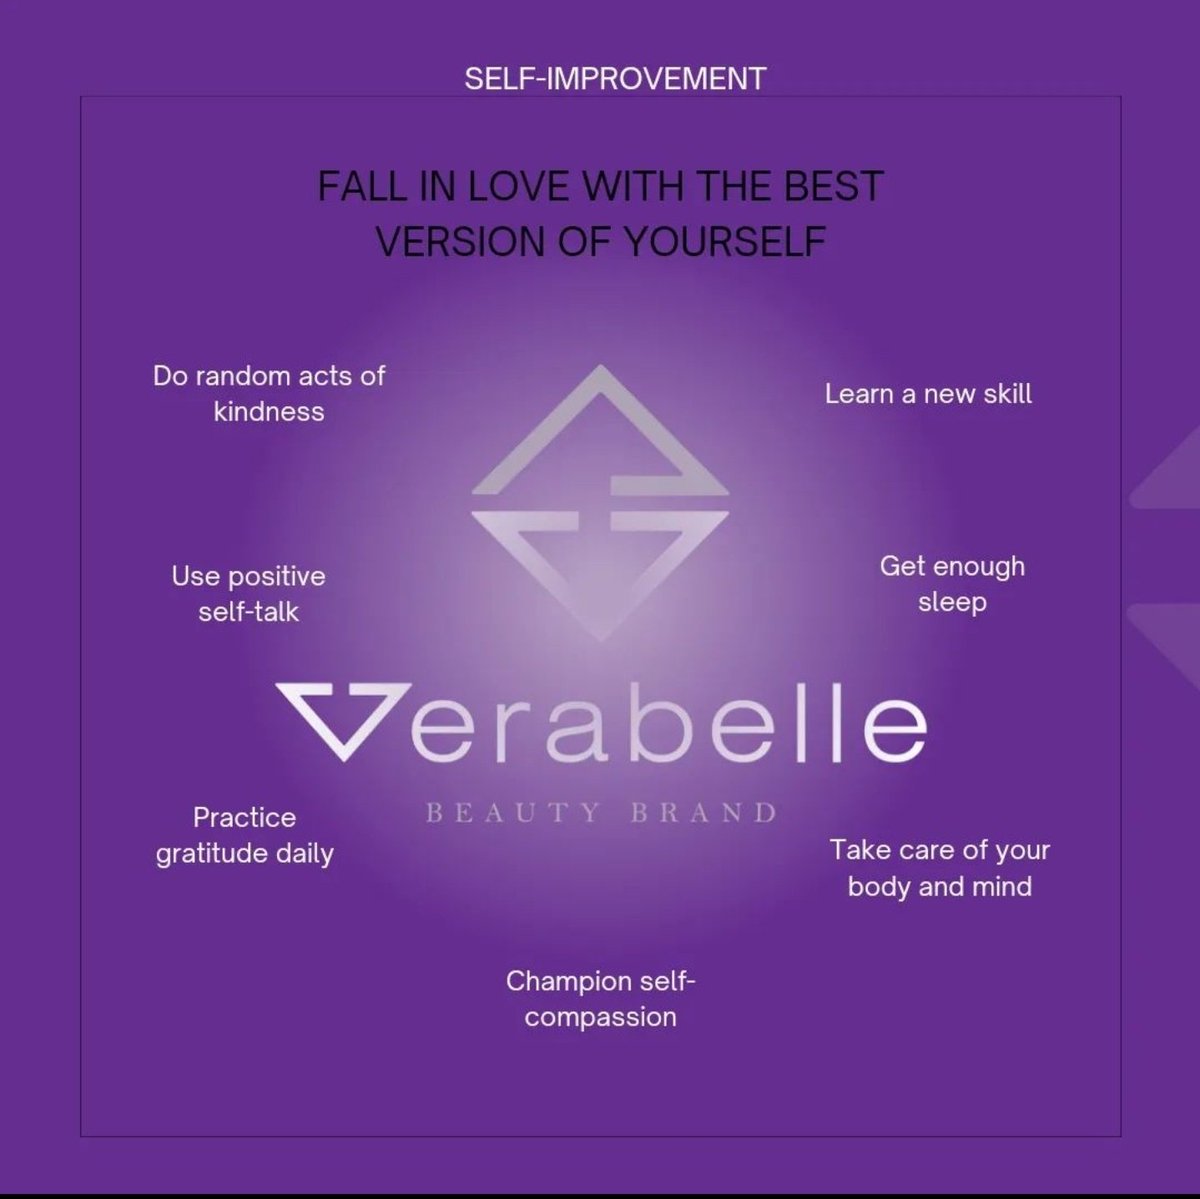 We have everything needed to step up your skincare and self care routine! 
Send a Dm for consultation ... ✨

#skincare #skincaretips #skincareproducts #skincareroutine #skincareaddict #skinhealth #skinhydration #skincareforbeginners #verabelle #skincaretips #skincareproduct